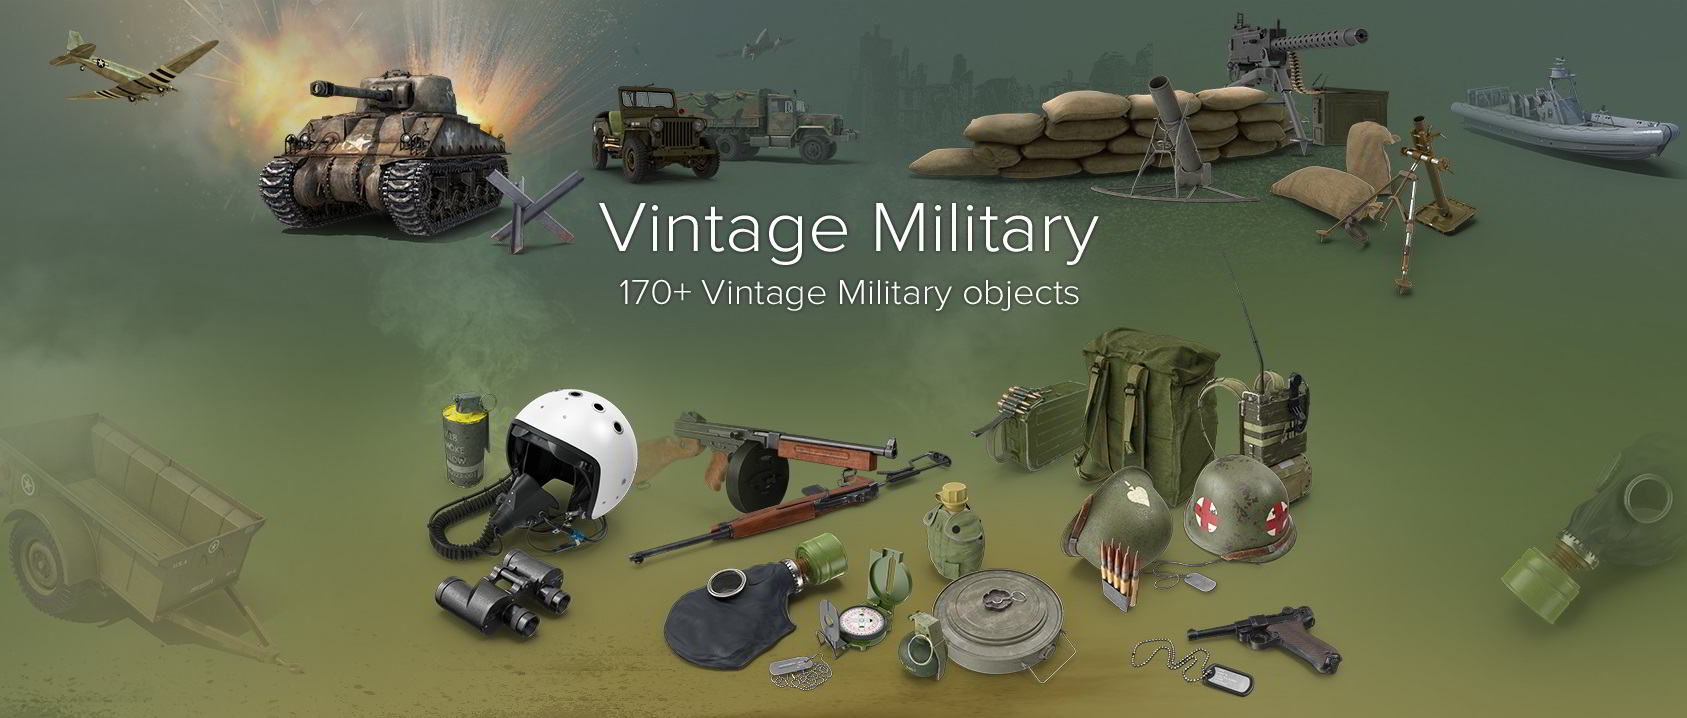 PixelSquid – Vintage Military Collection free download